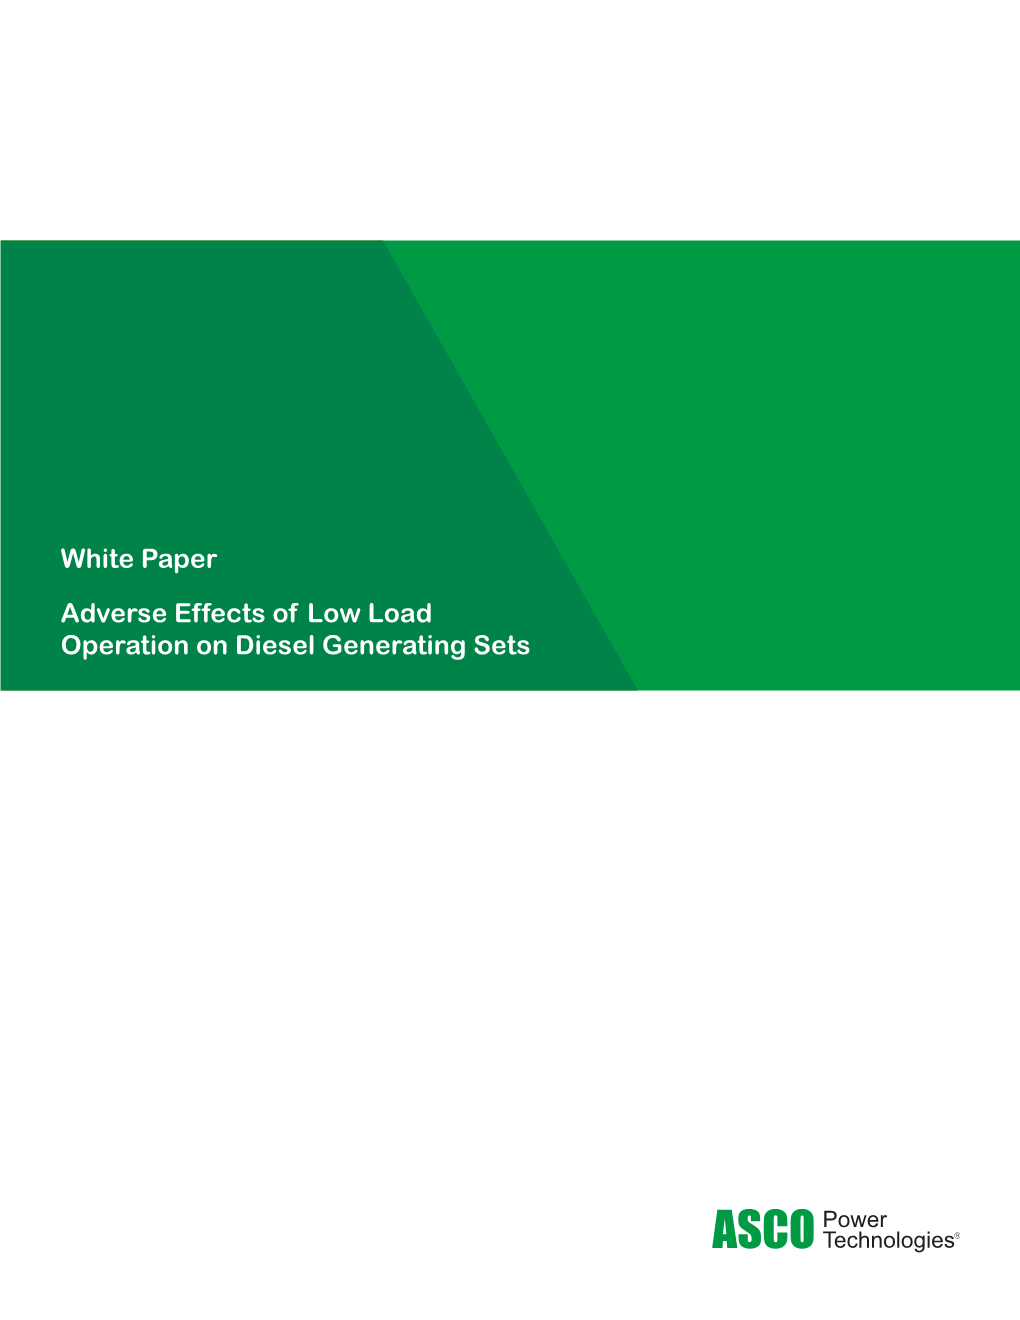 Adverse Effects of Low Load Operation on Diesel Generating Sets Adverse Effects of Low Load Operation on Diesel Generating Sets